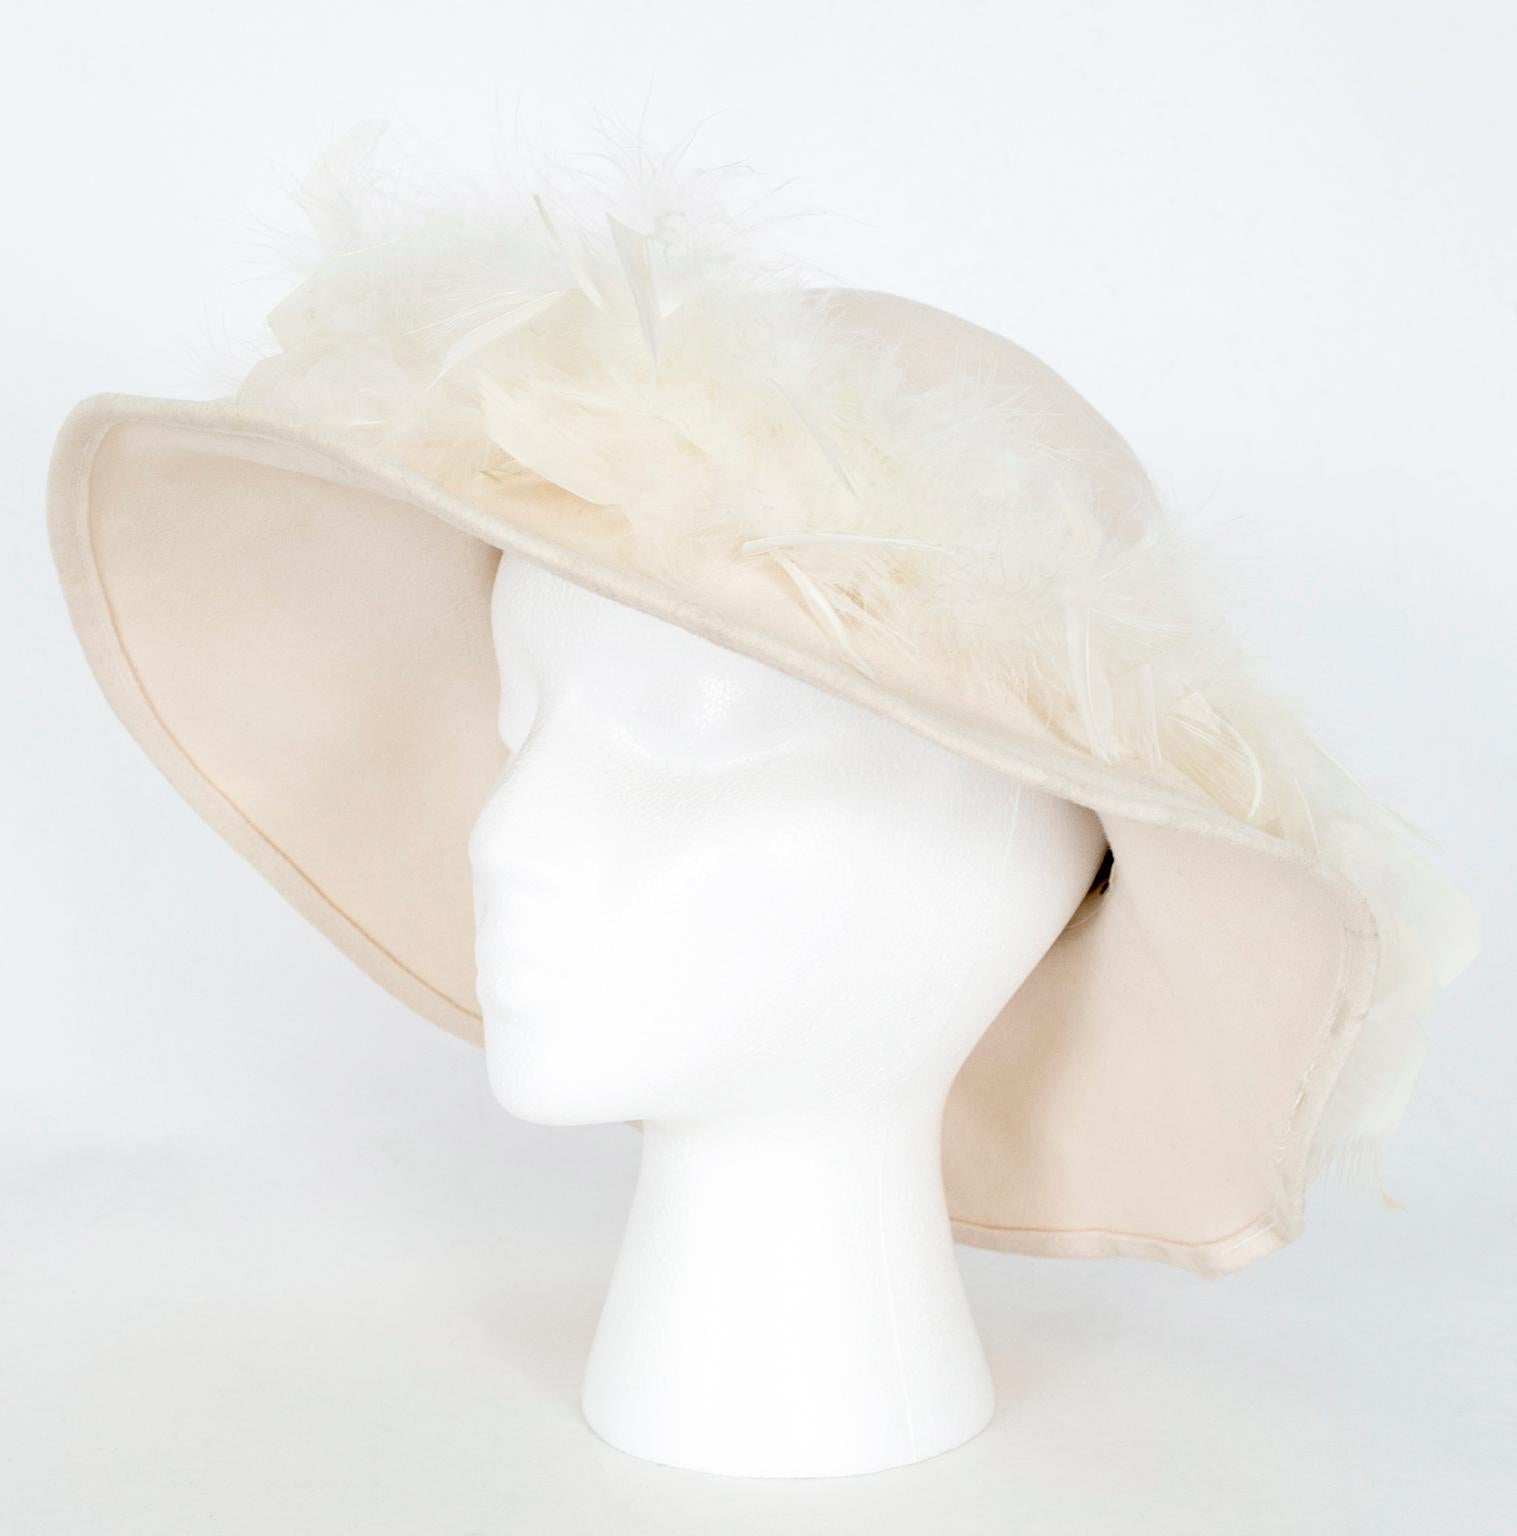 Started in 1868, the Bollman Hat Company is America's oldest hat maker and still provides luxury millinery products for brands like Helen Kaminski. Made of soft doeskin wool in wardrobe-friendly winter white, this hat is sturdy enough to be styled